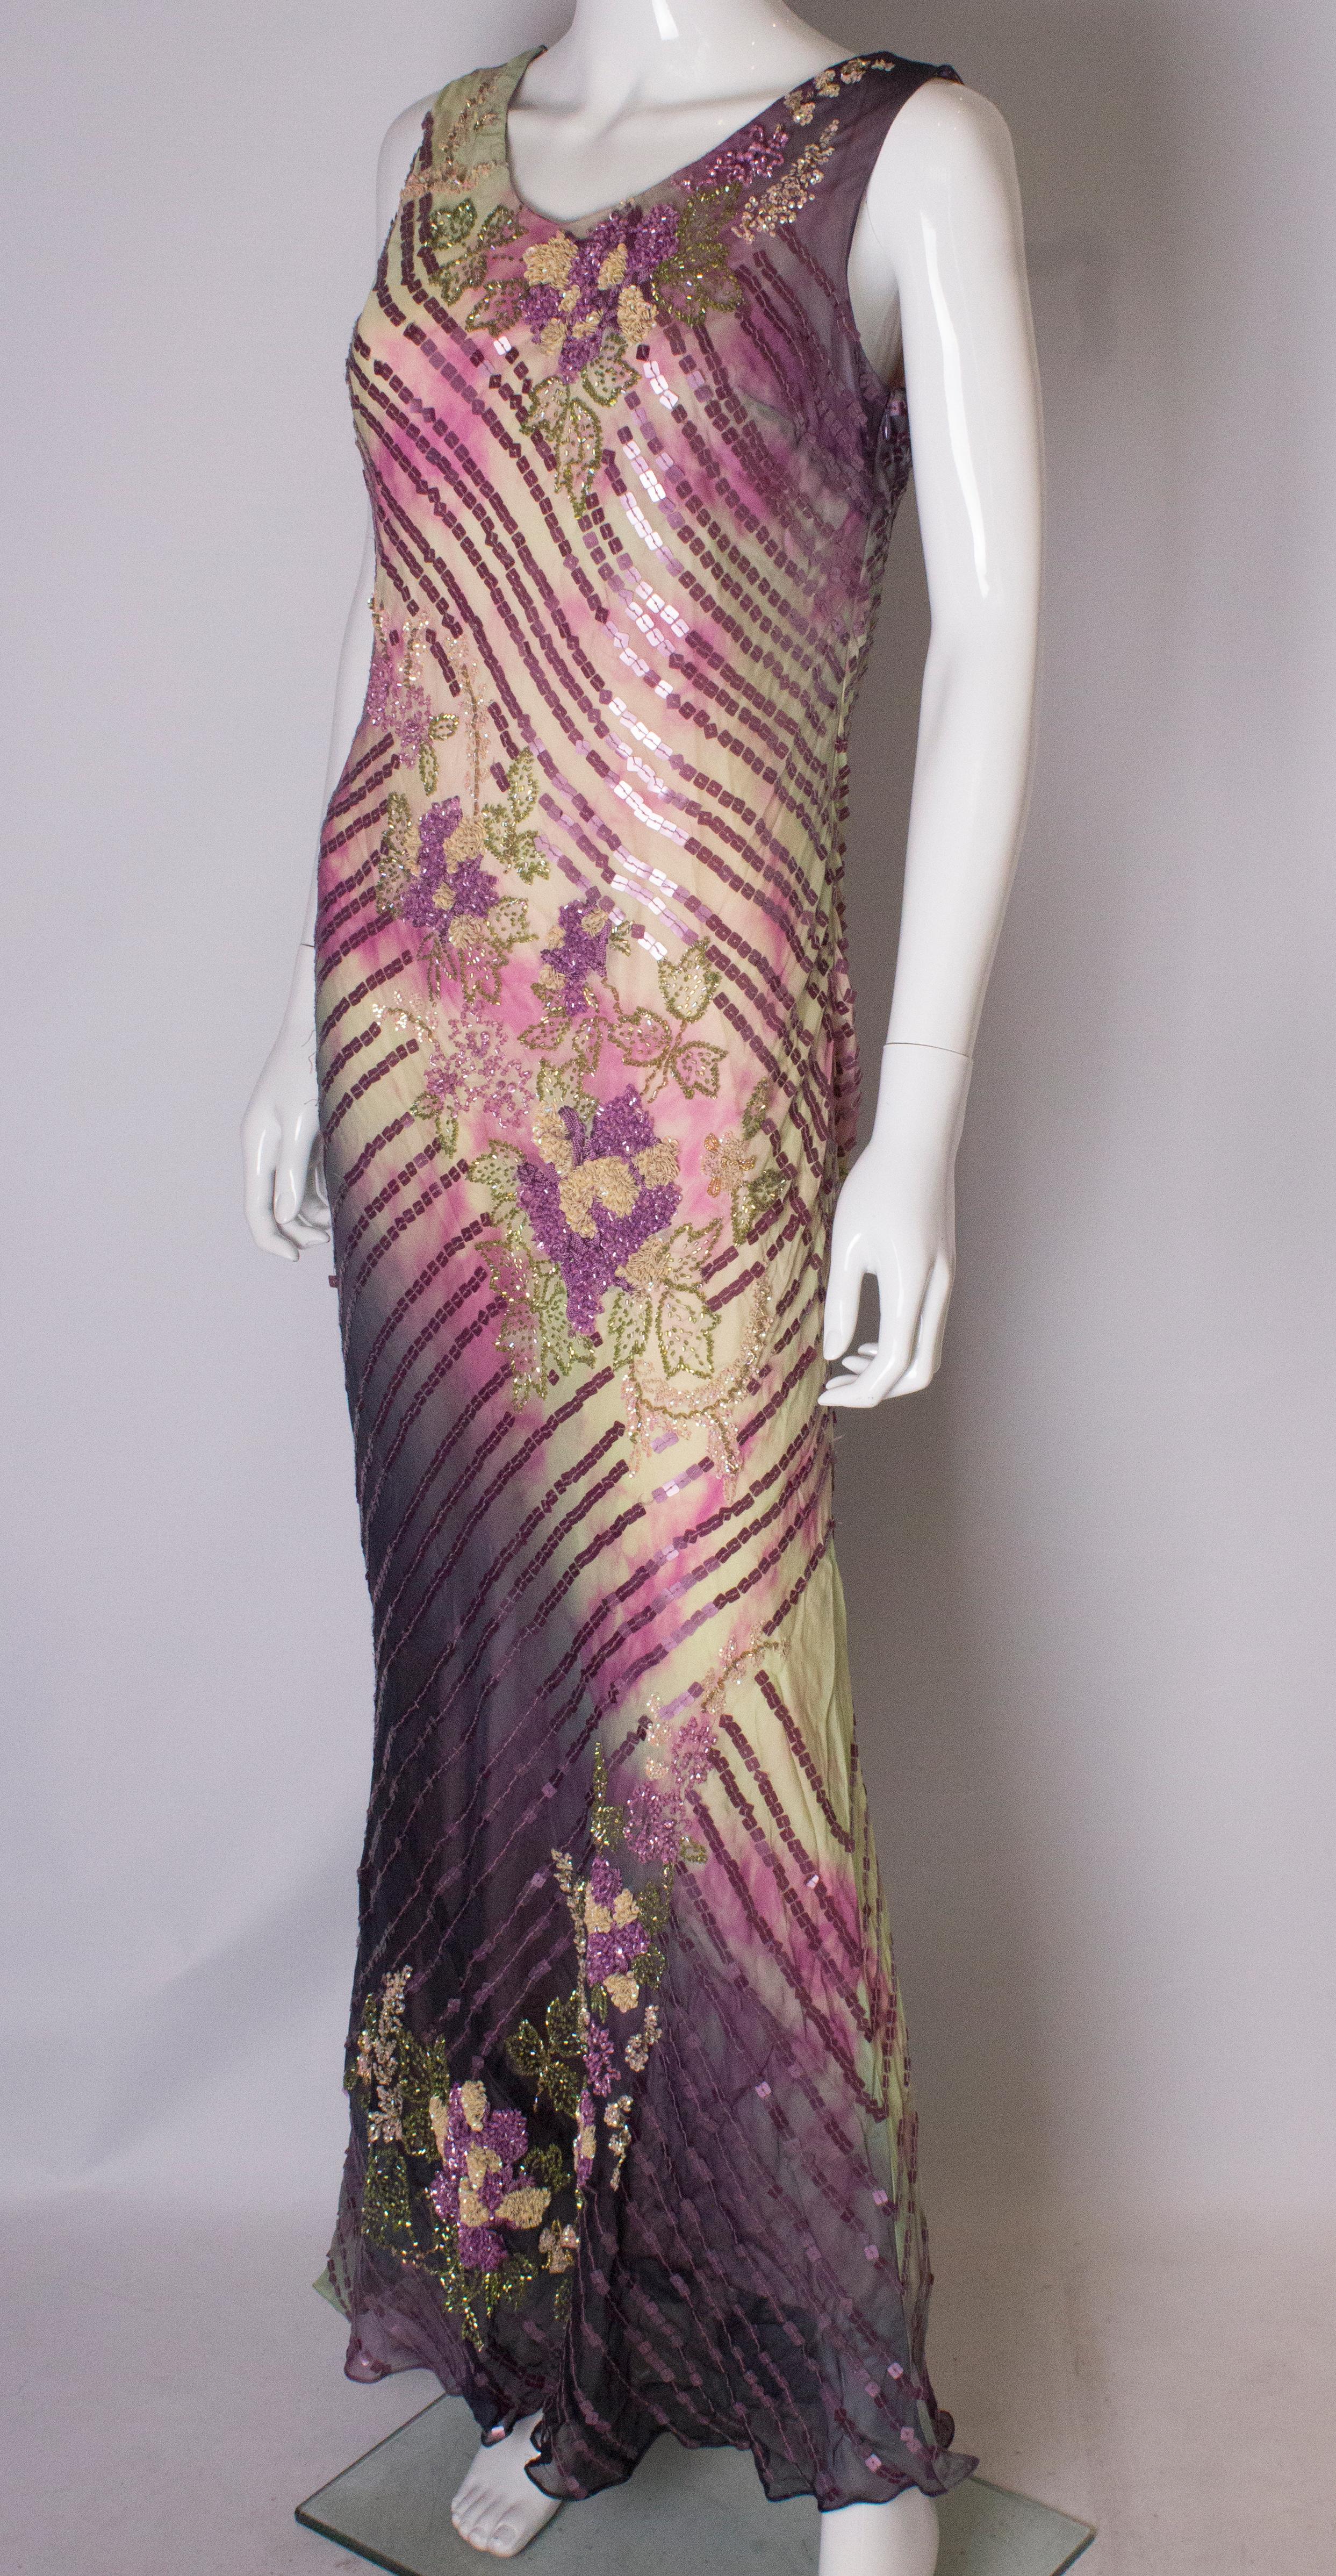 Beaded Vintage Gown with Tie Die Effect In Good Condition For Sale In London, GB